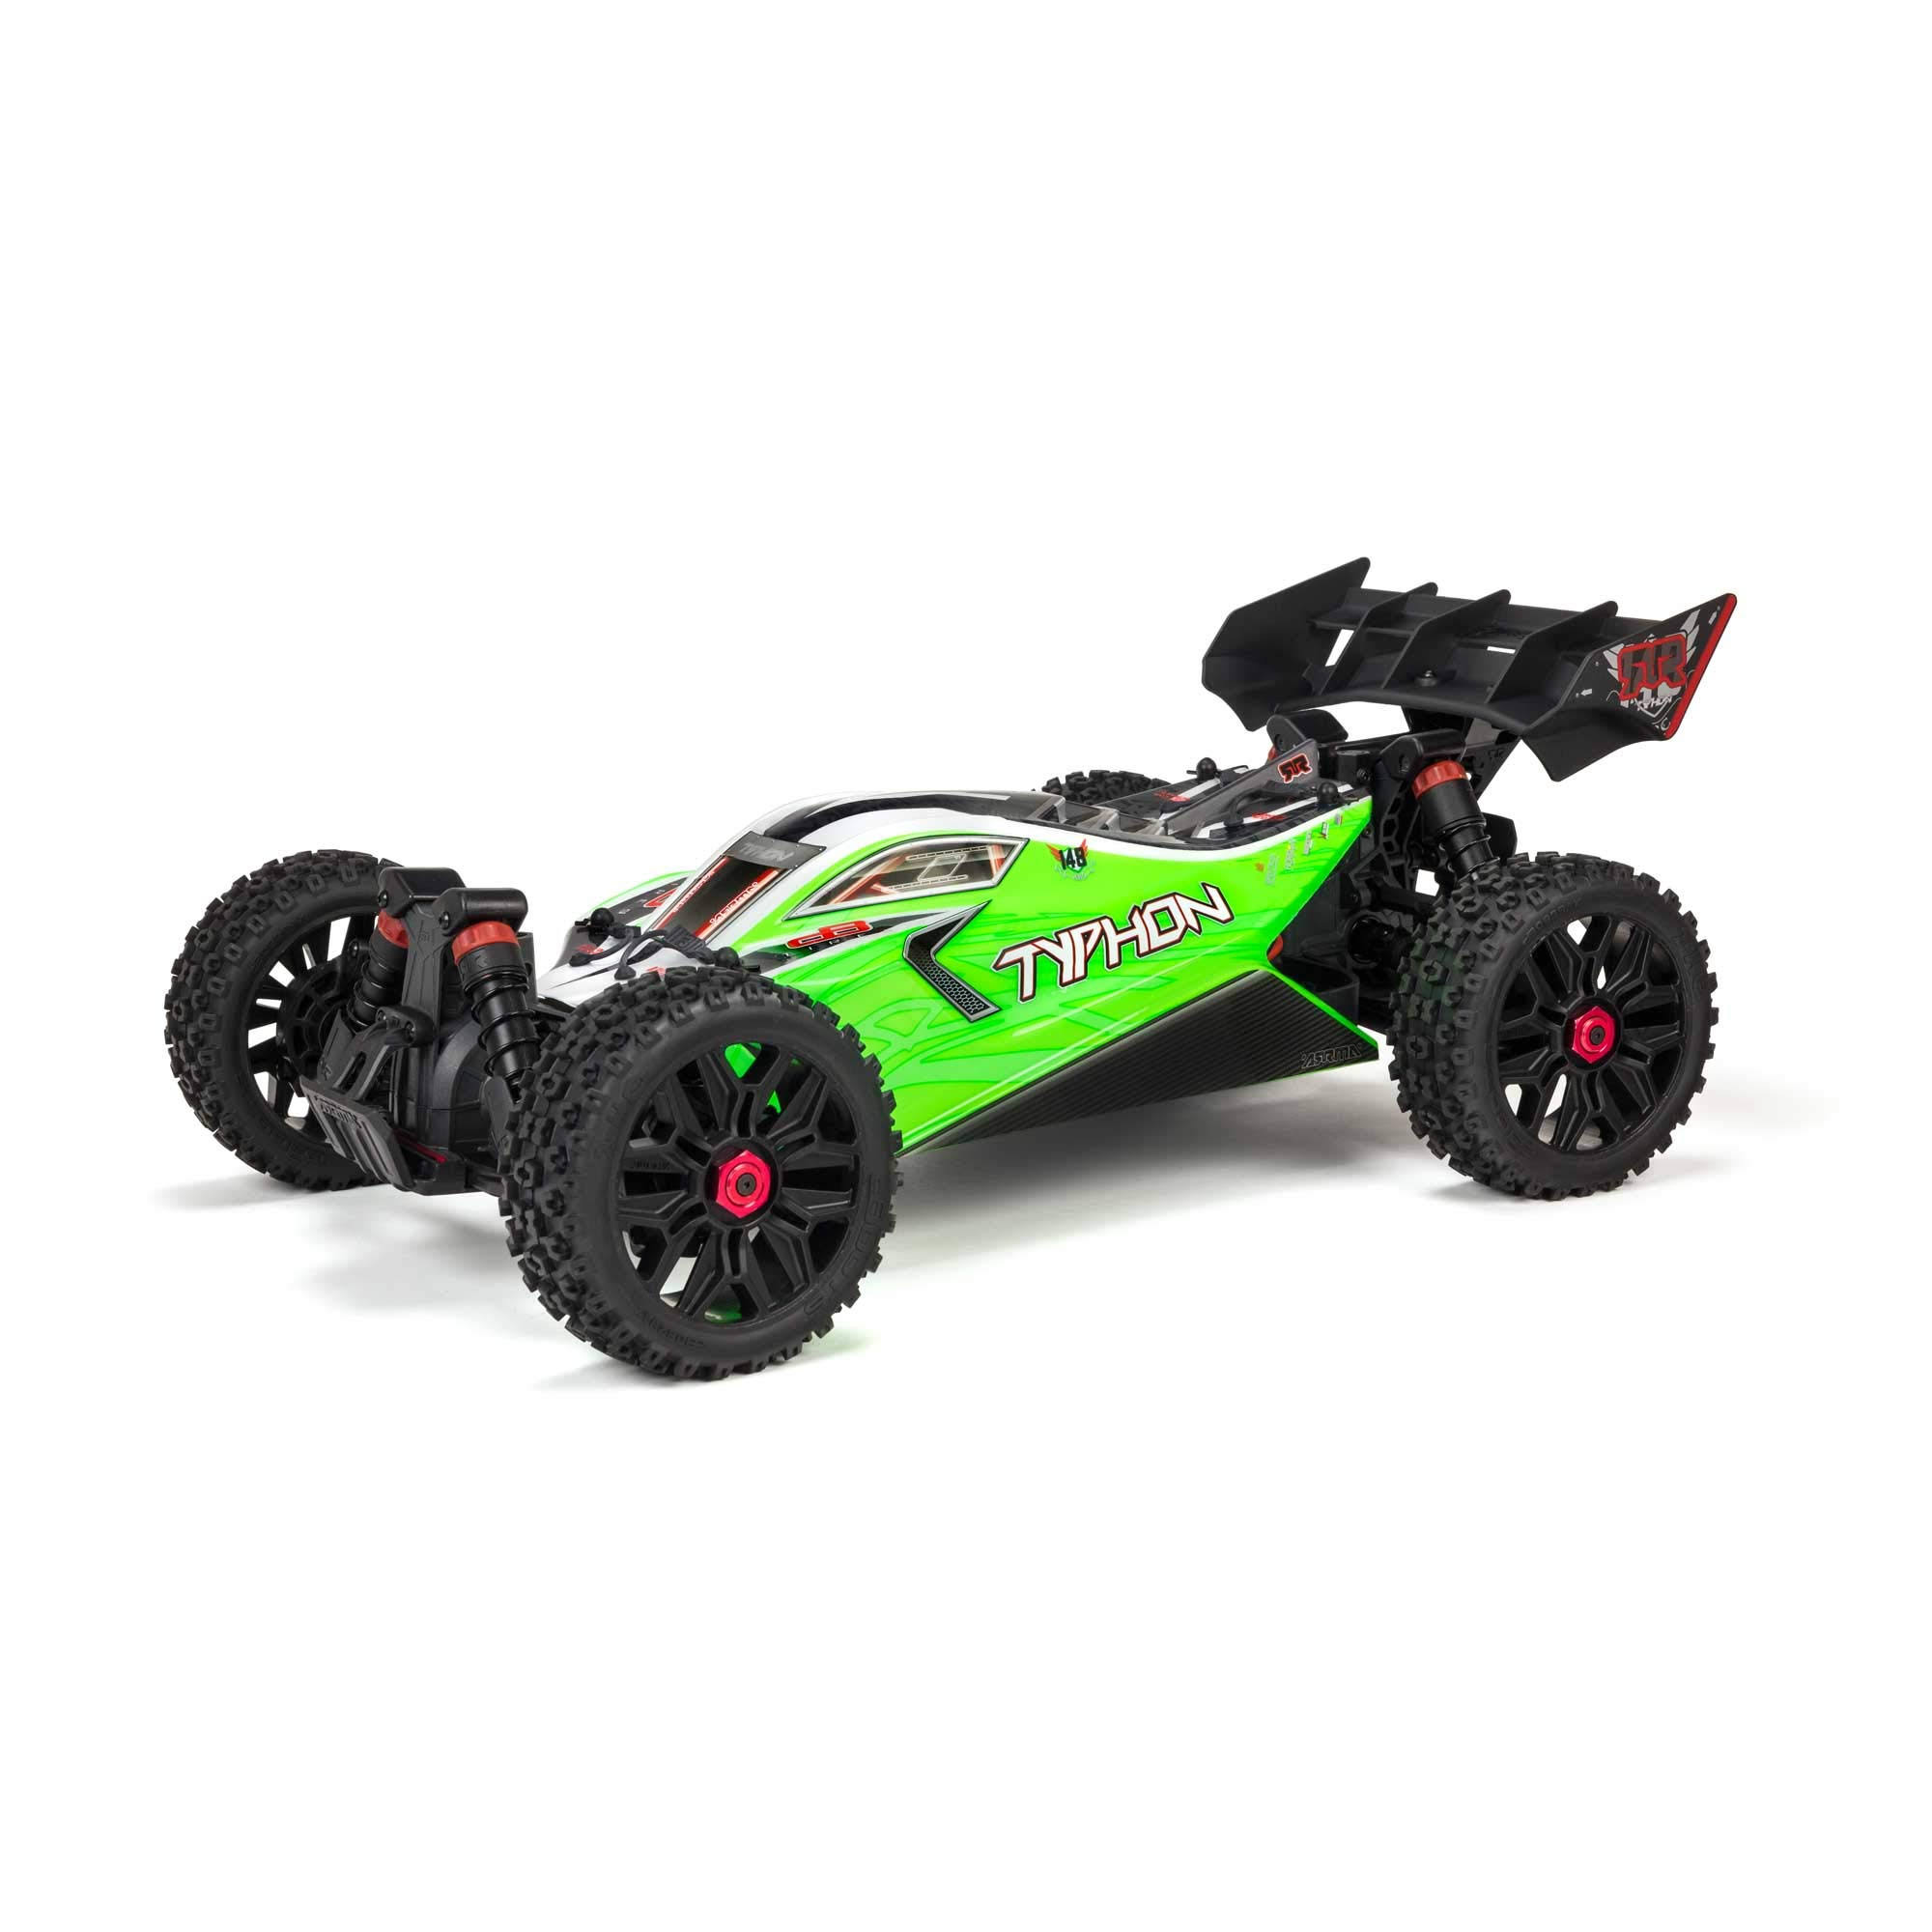 Arrma 1/10 Typhon 4x4 V3 Mega 550 Brushed Buggy RC Truck RTR (Transmitter, Receiver, NiMH Battery and Charger Included), Green, ARA4206V3